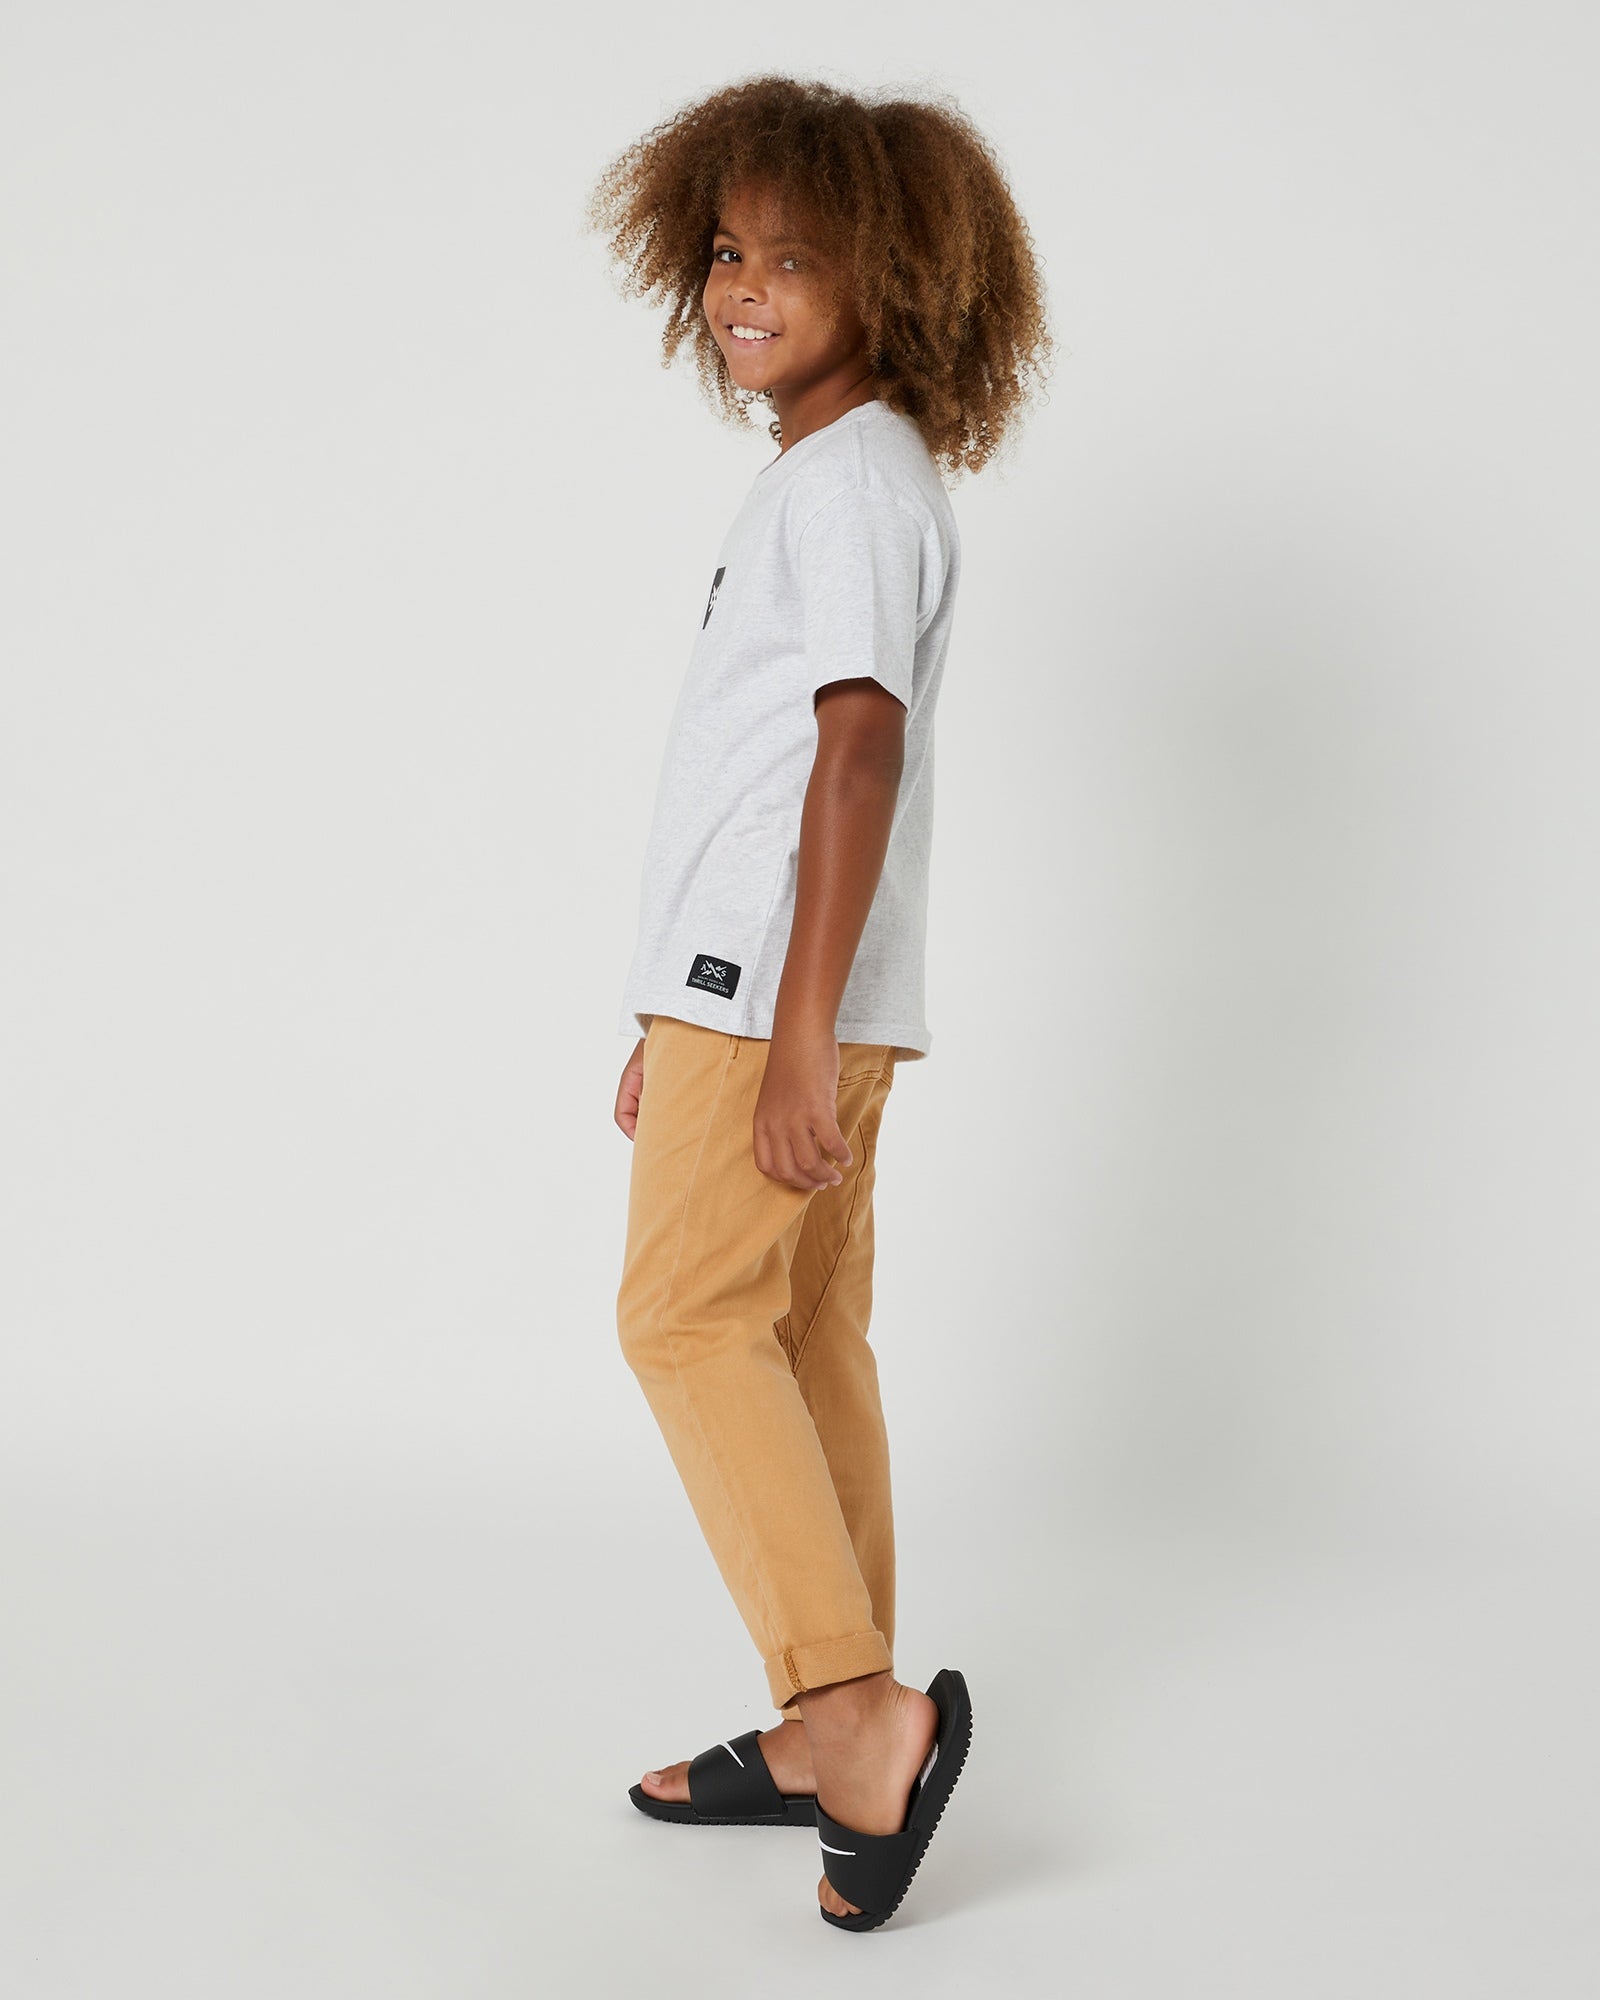 Experience the ultimate in comfort and style with the 100% Grey Marle cotton Kids Box Short Sleeve Tee from Alphabet Soup. Perfect for skateboarding and BMX, this shirt features a roomy box fit and ribbed crew neckline, along with a stylish logo patch.